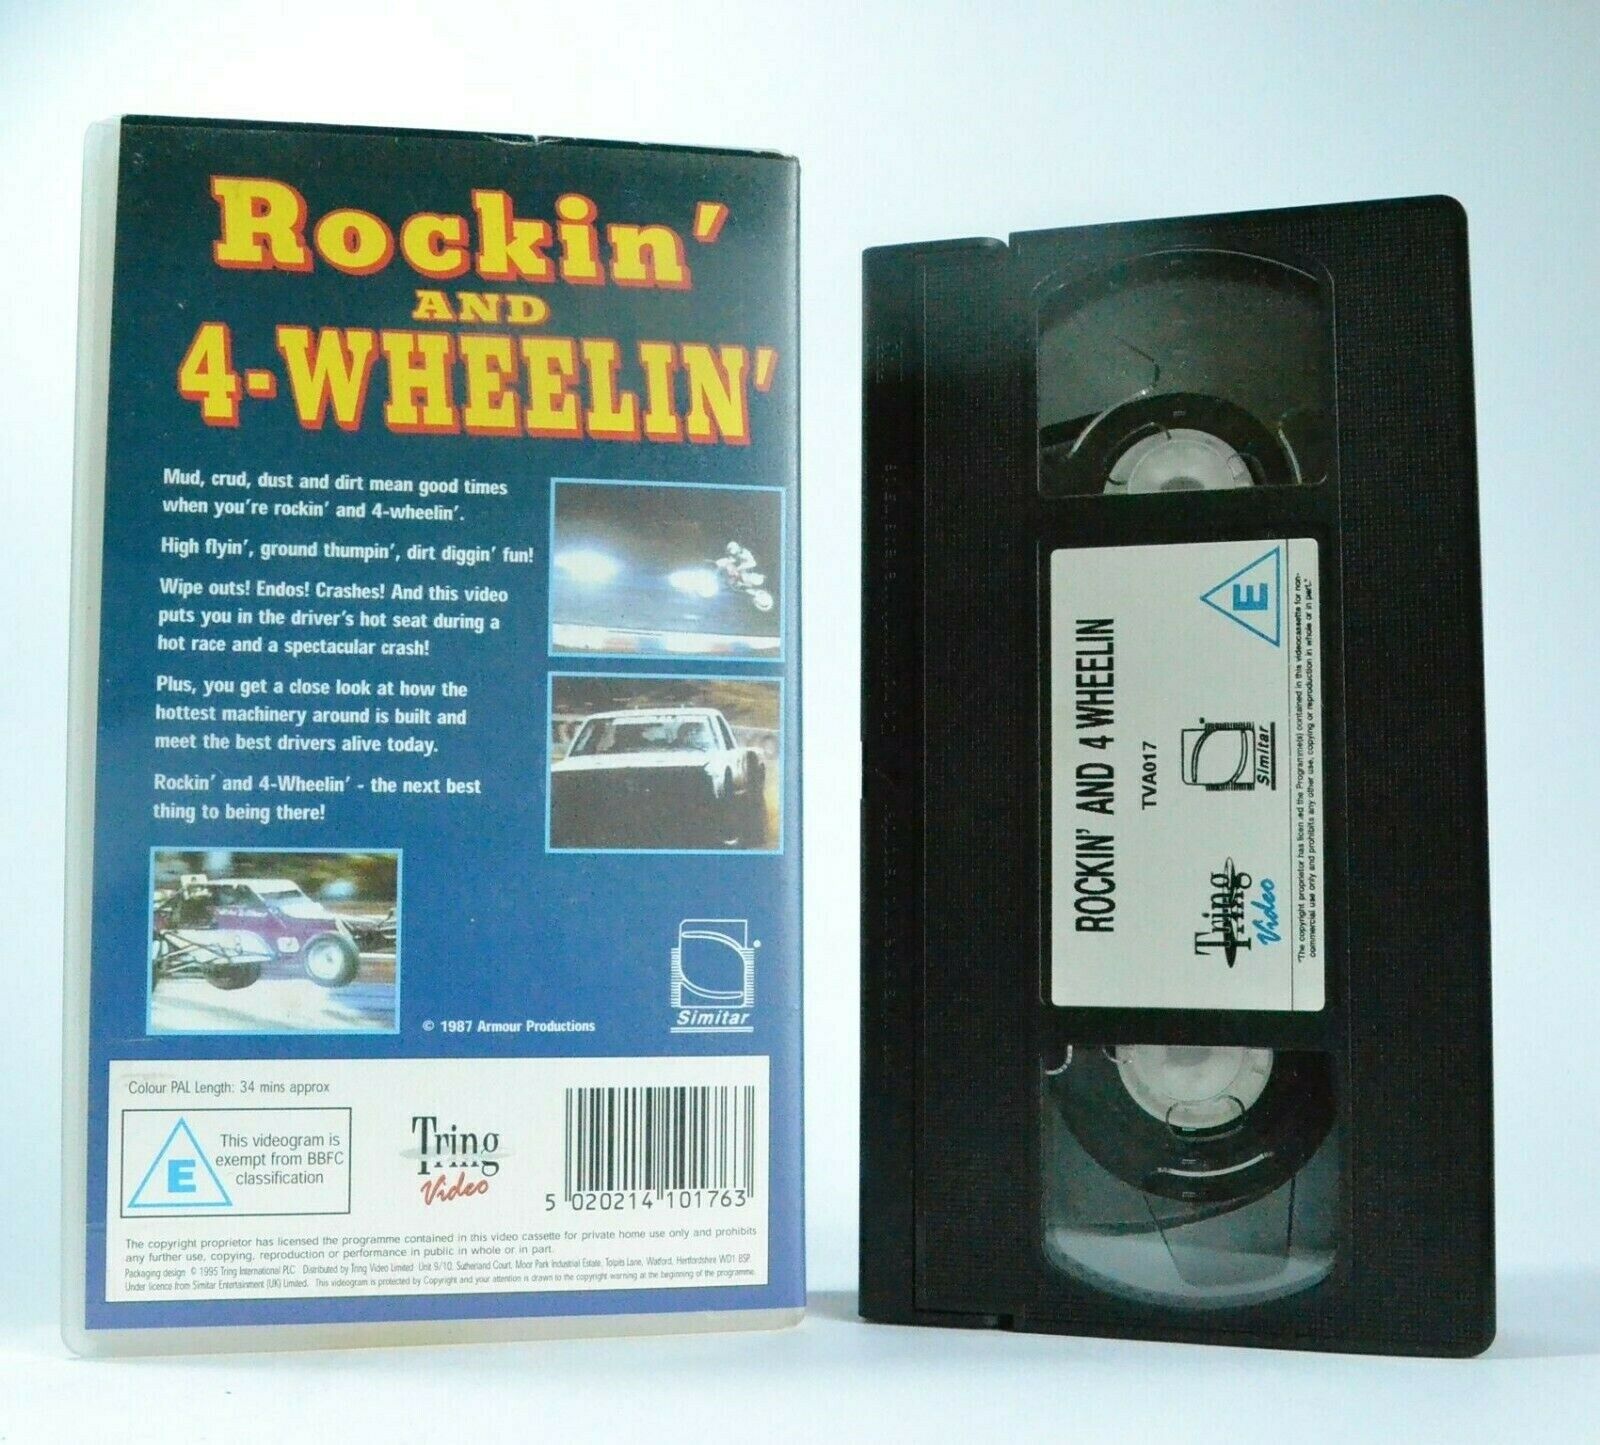 Rockin' And 4-Wheelin' - Fast Action - Car Crashes - Hot Stereo Soundtrack - VHS-